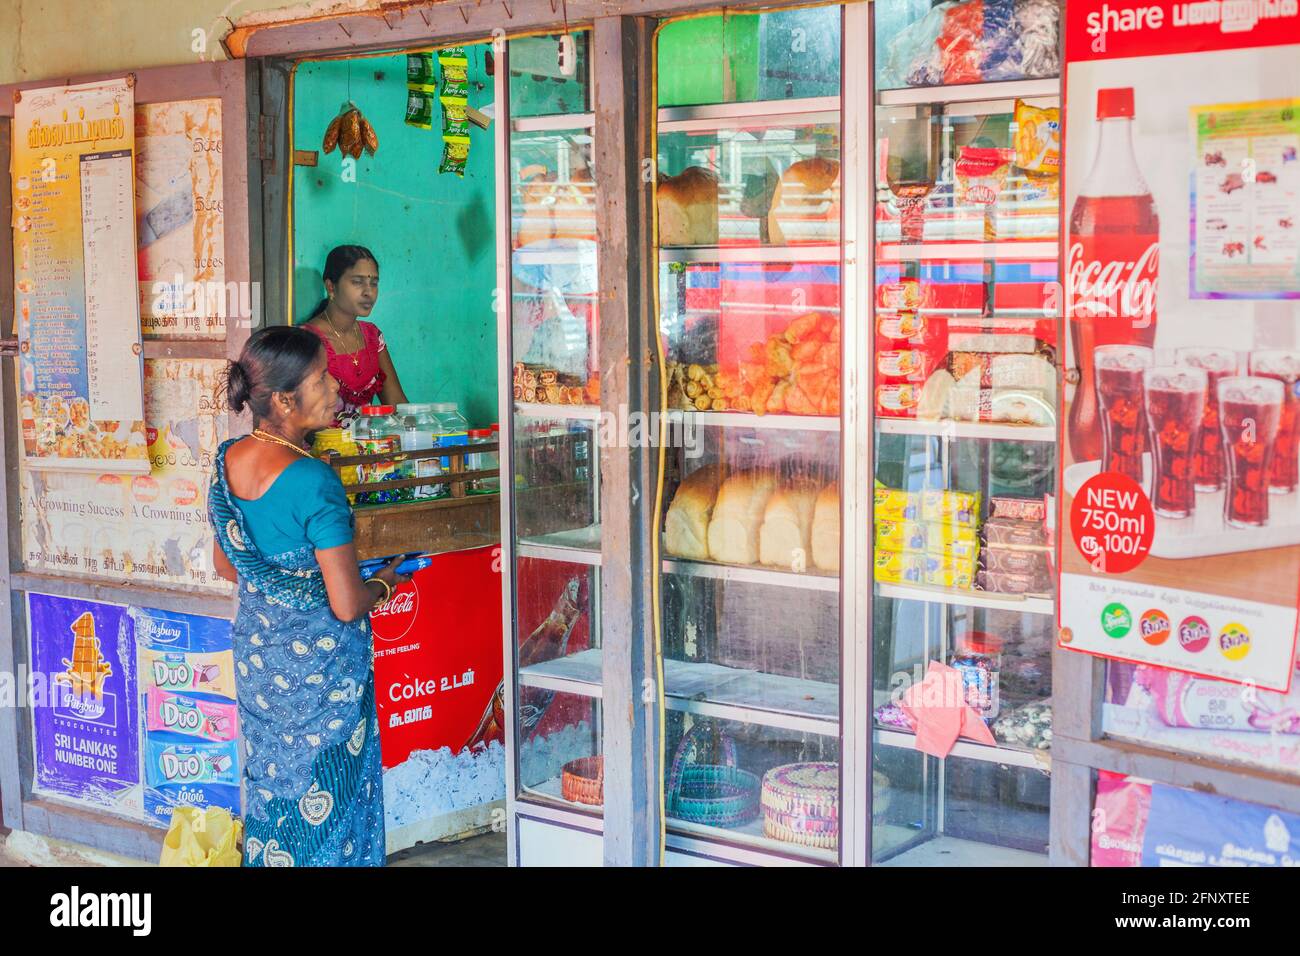 Sri Lankan female standing at shop doorway looking at items displayed in the window, Mullaitivu, Northern Province, Sri Lanka Stock Photo